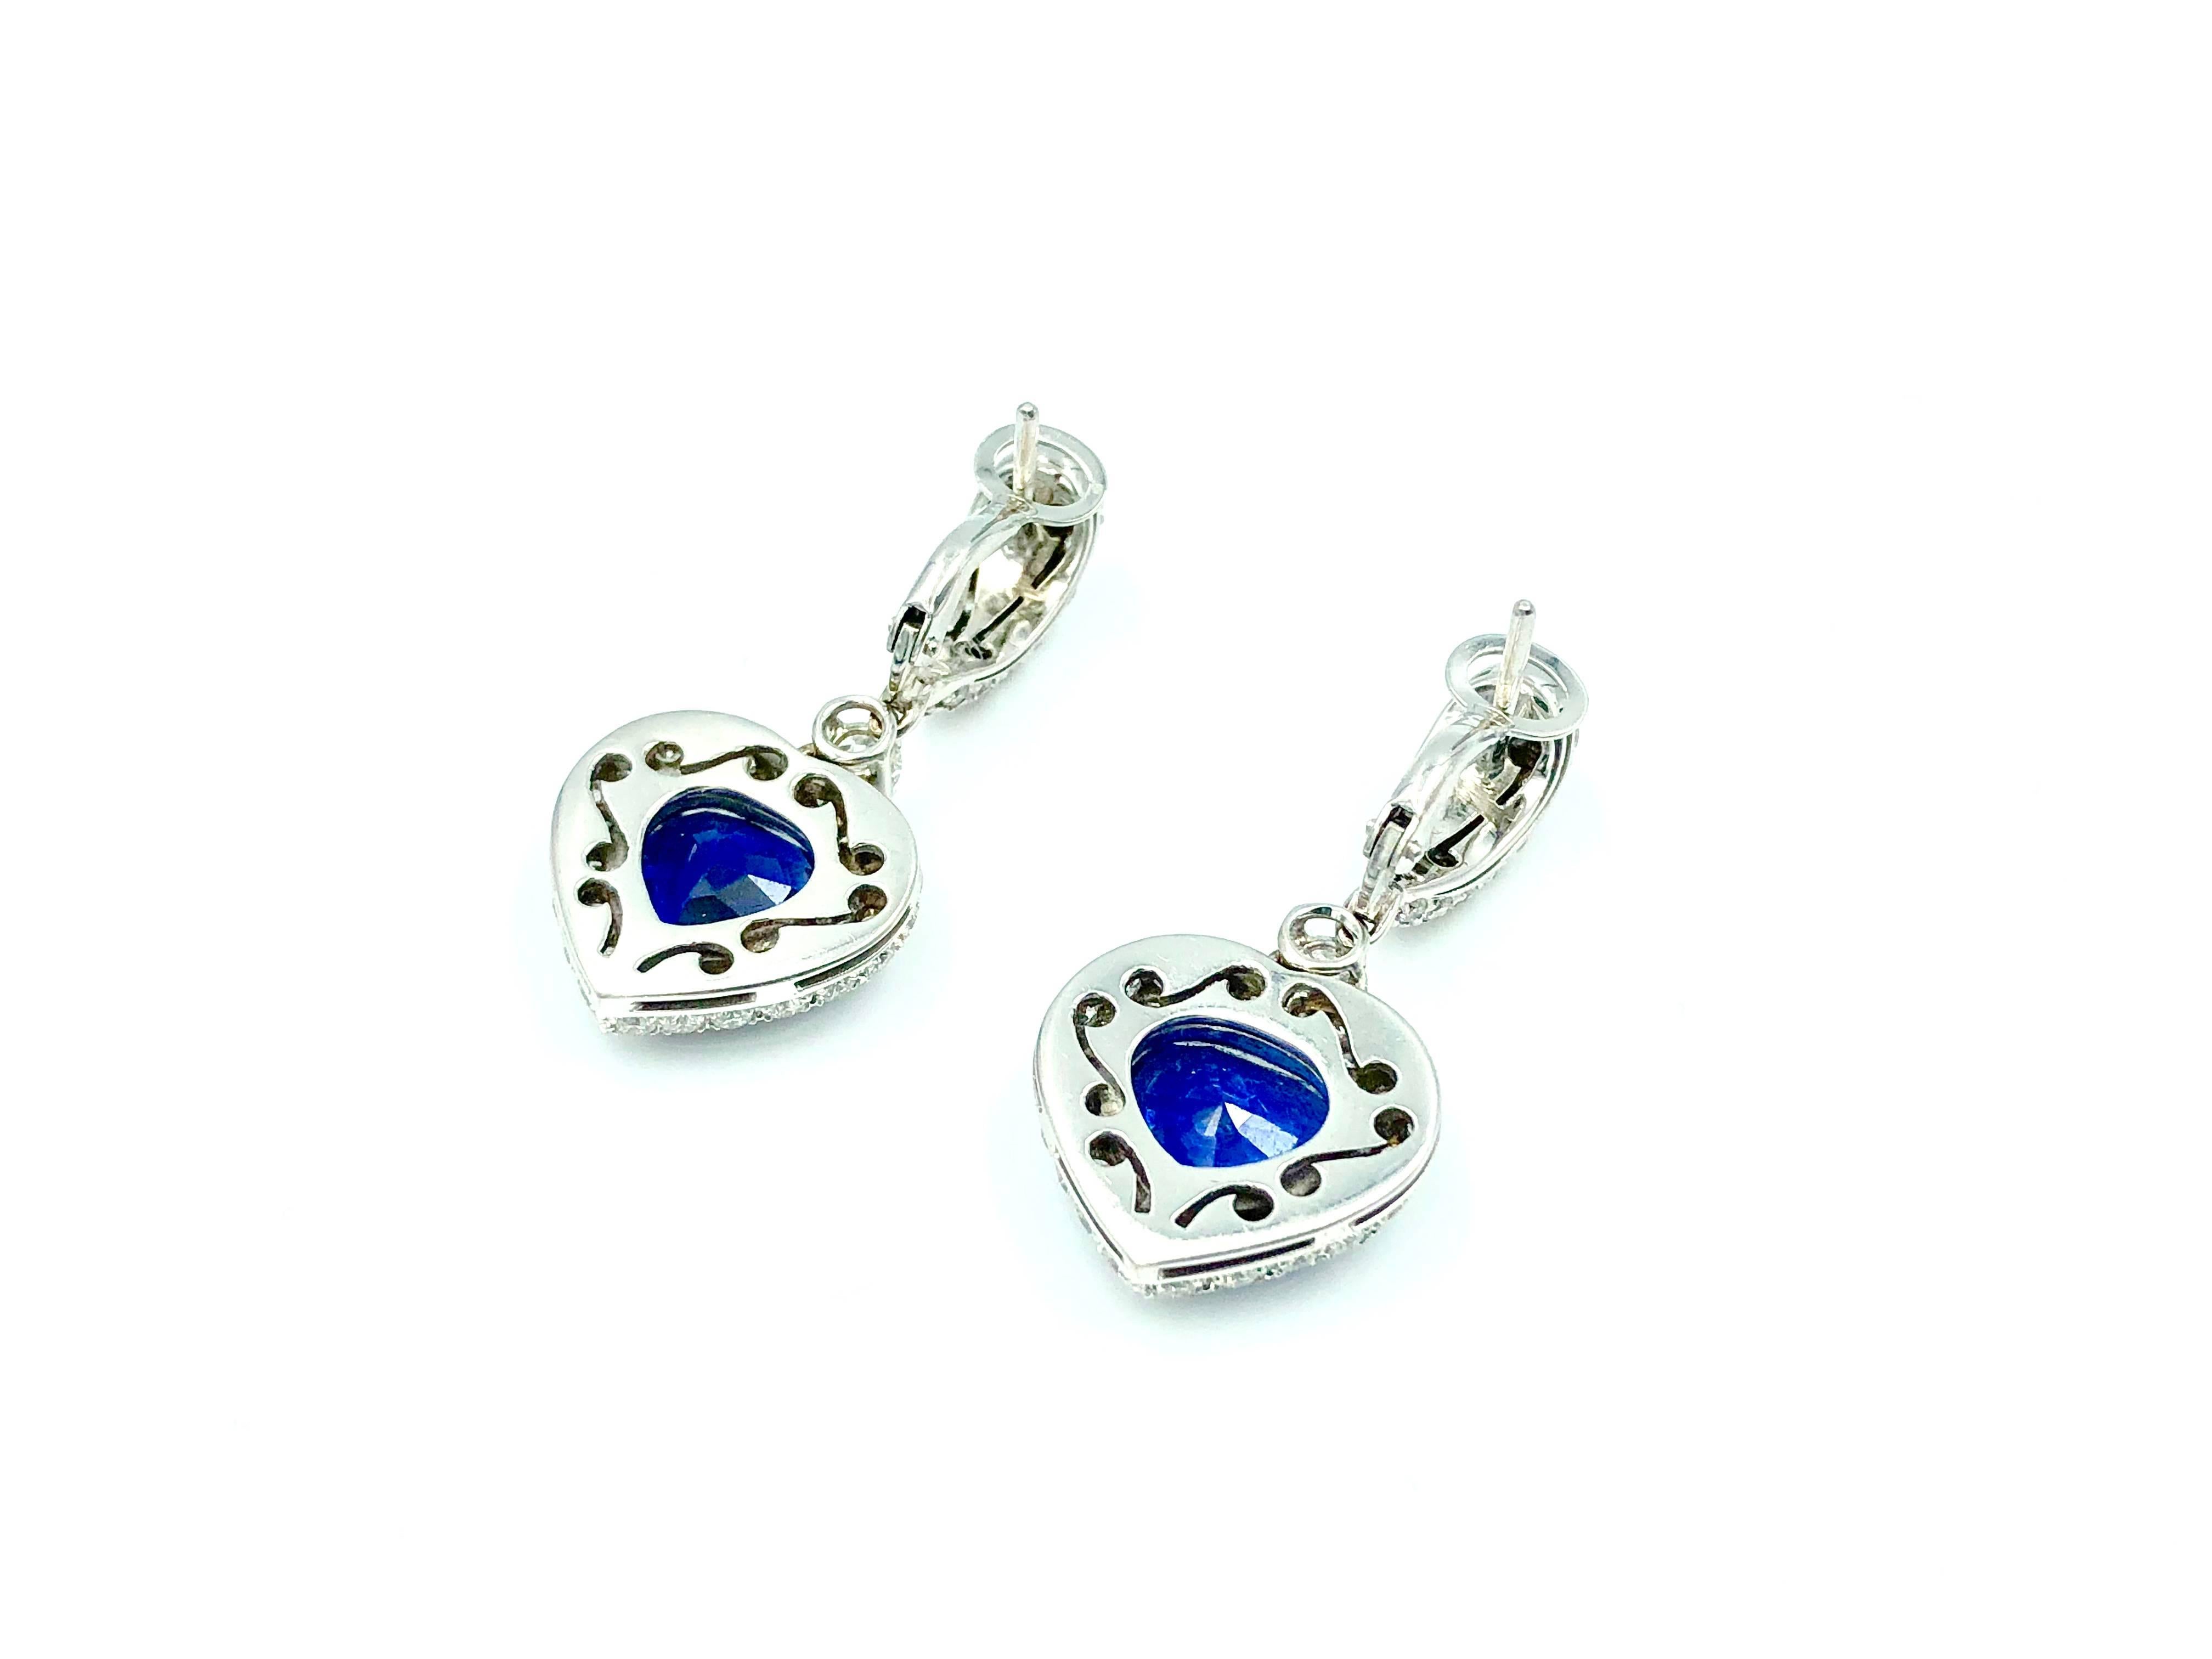 A romantic design for this pair of  18kt gold, sapphire and diamond earrings. The sapphires are heart cut and are surrounded by a pave of natural quality dimaonds. The color the these perfectly trasparent heart-shared sapphires is deeply blue.

2